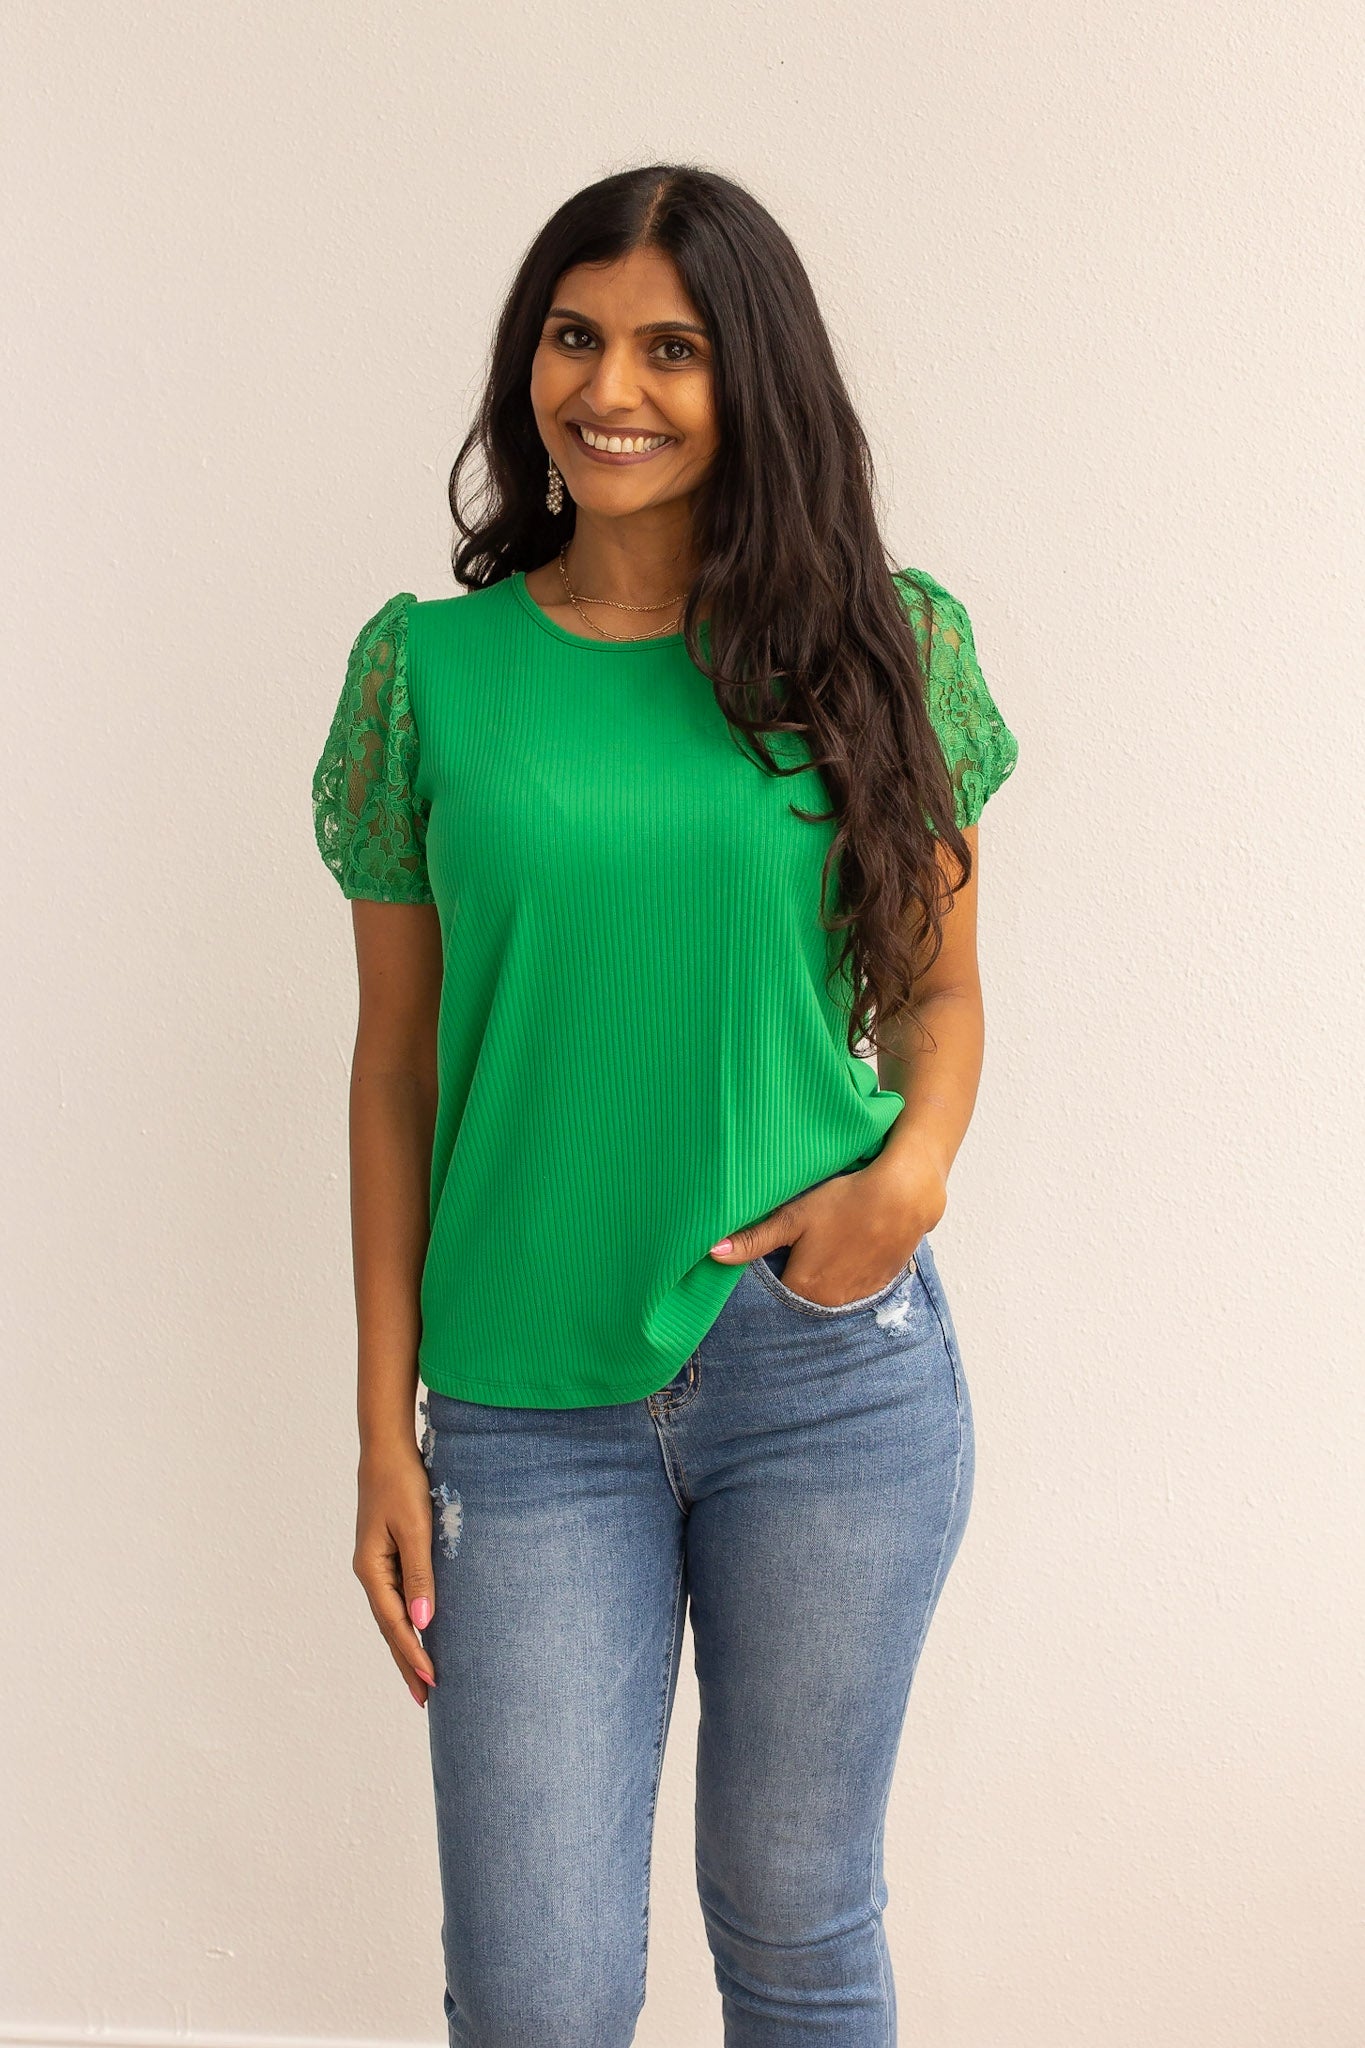 Green Ribbed Tee With Lace Puff Sleeve.